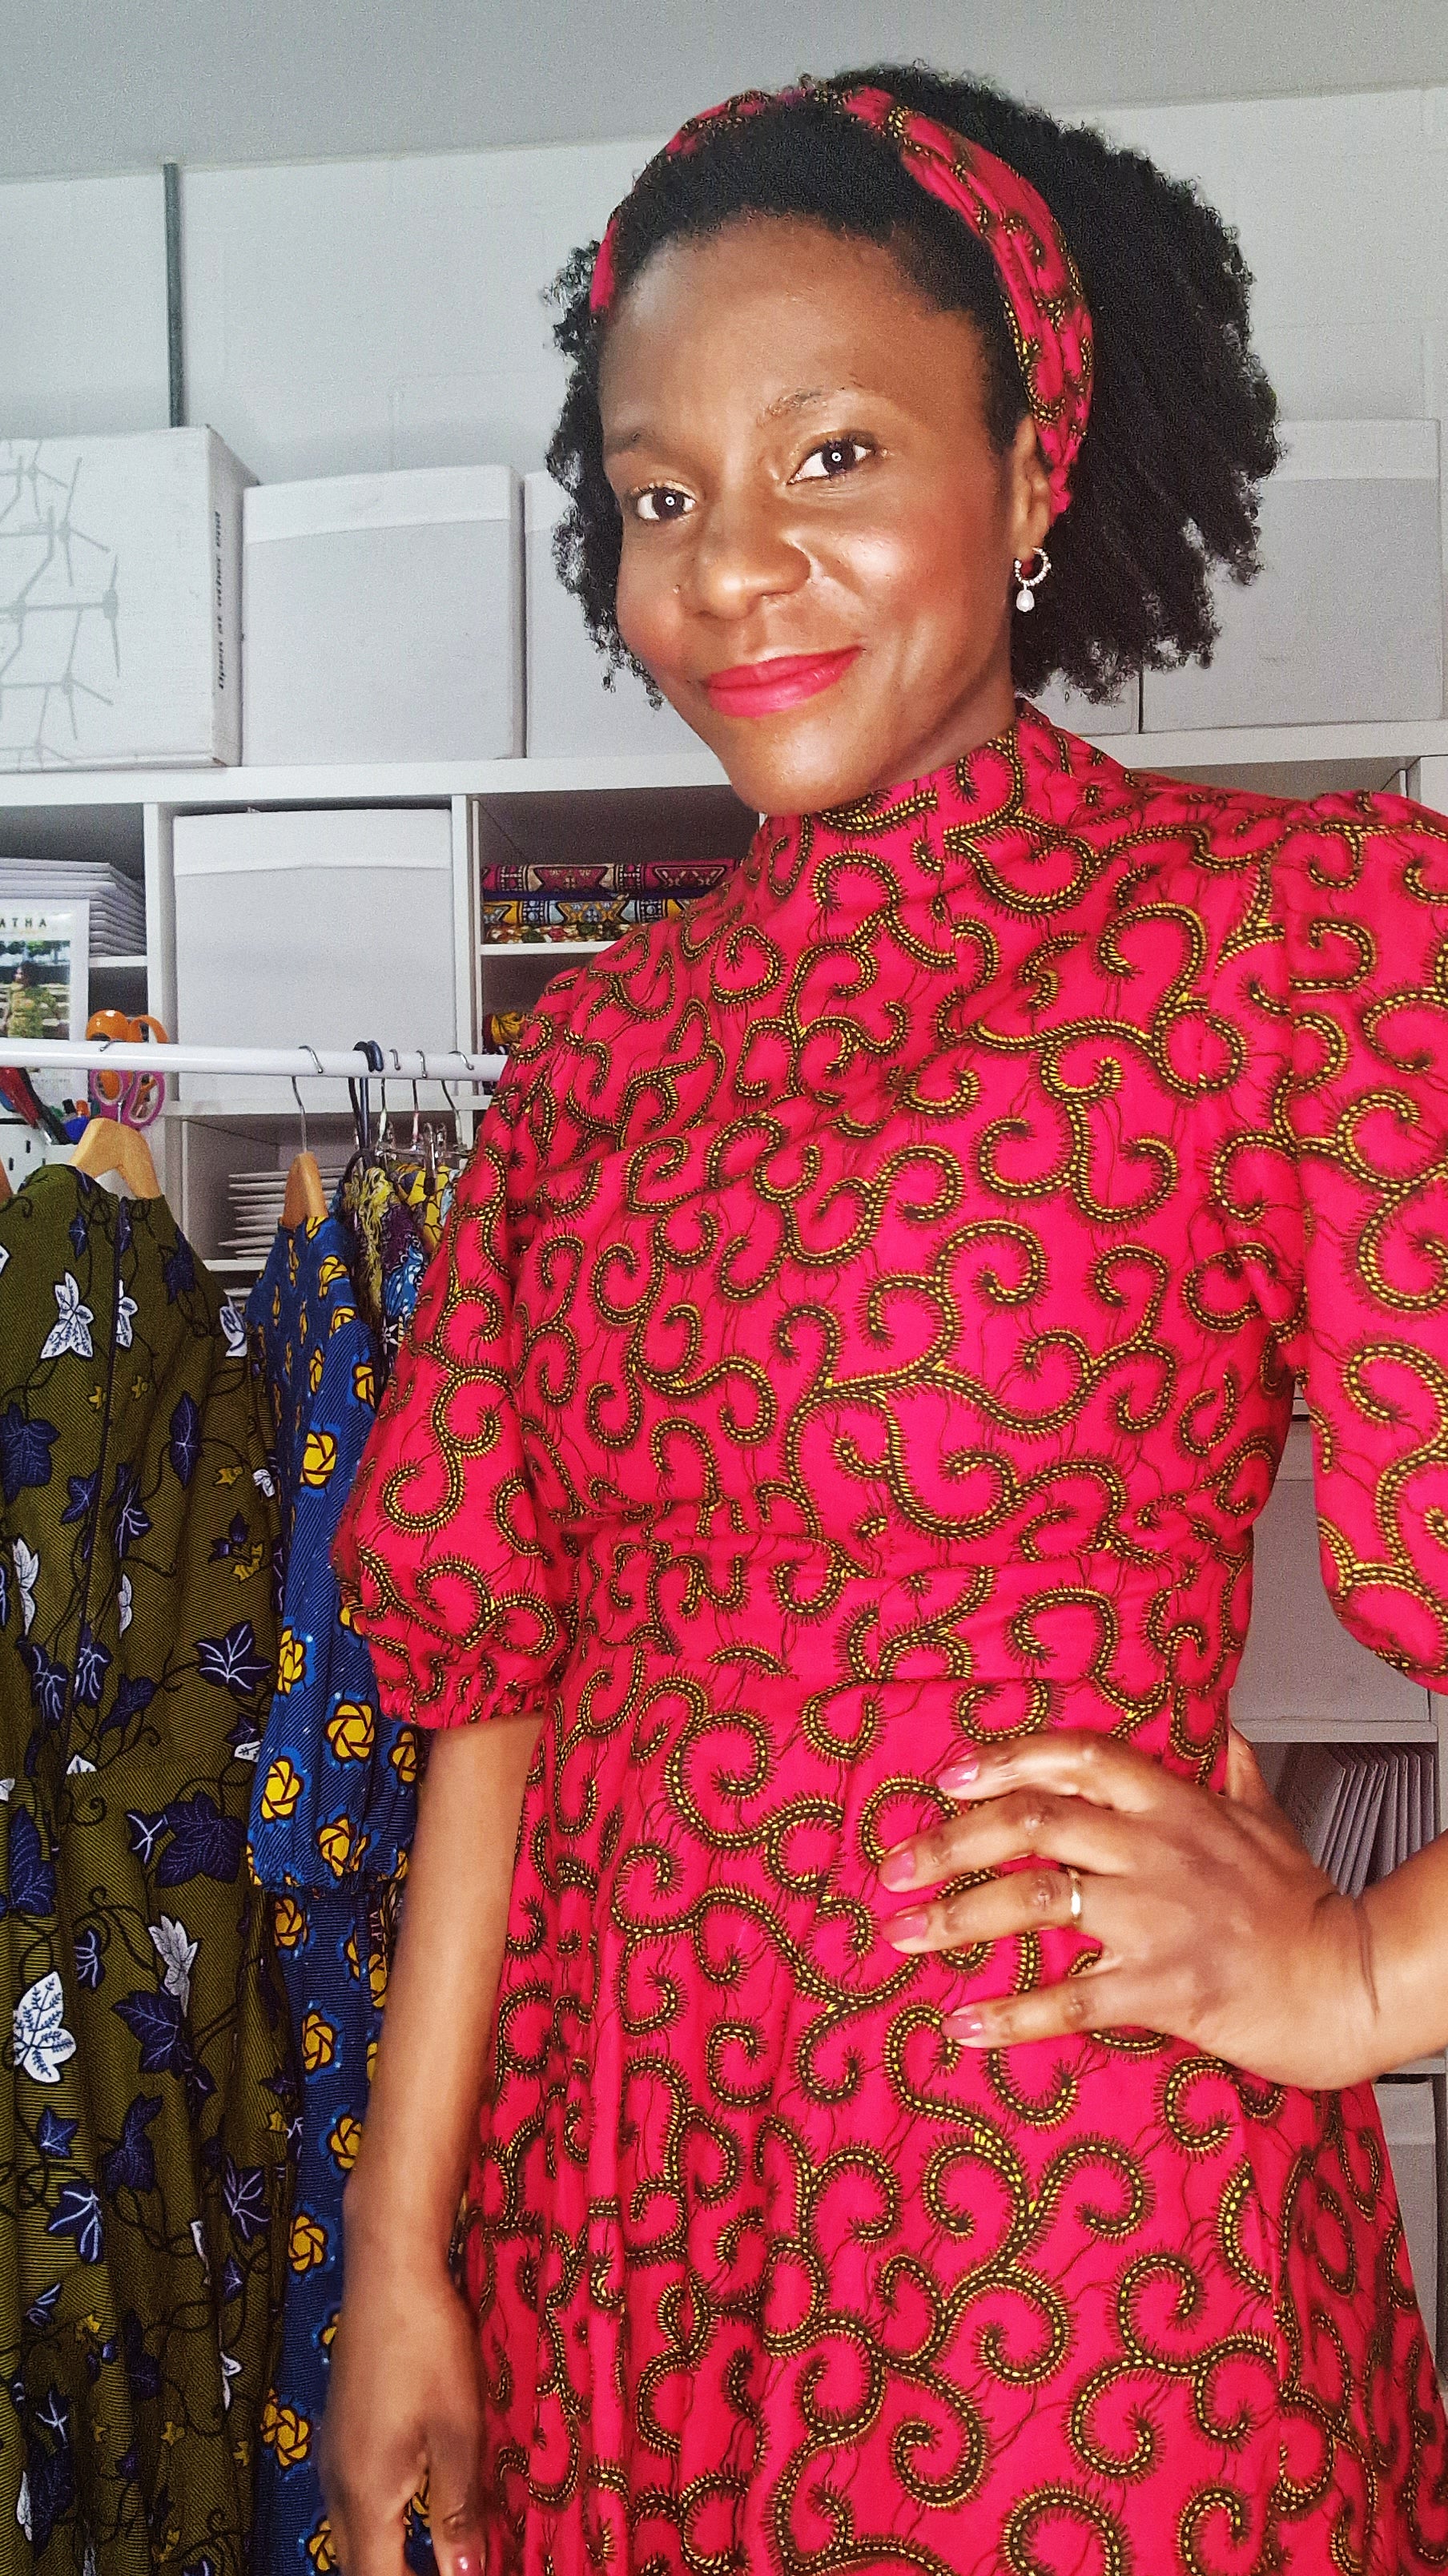 A woman in a room posing with the red headband with swirly elements and a matching print dress.